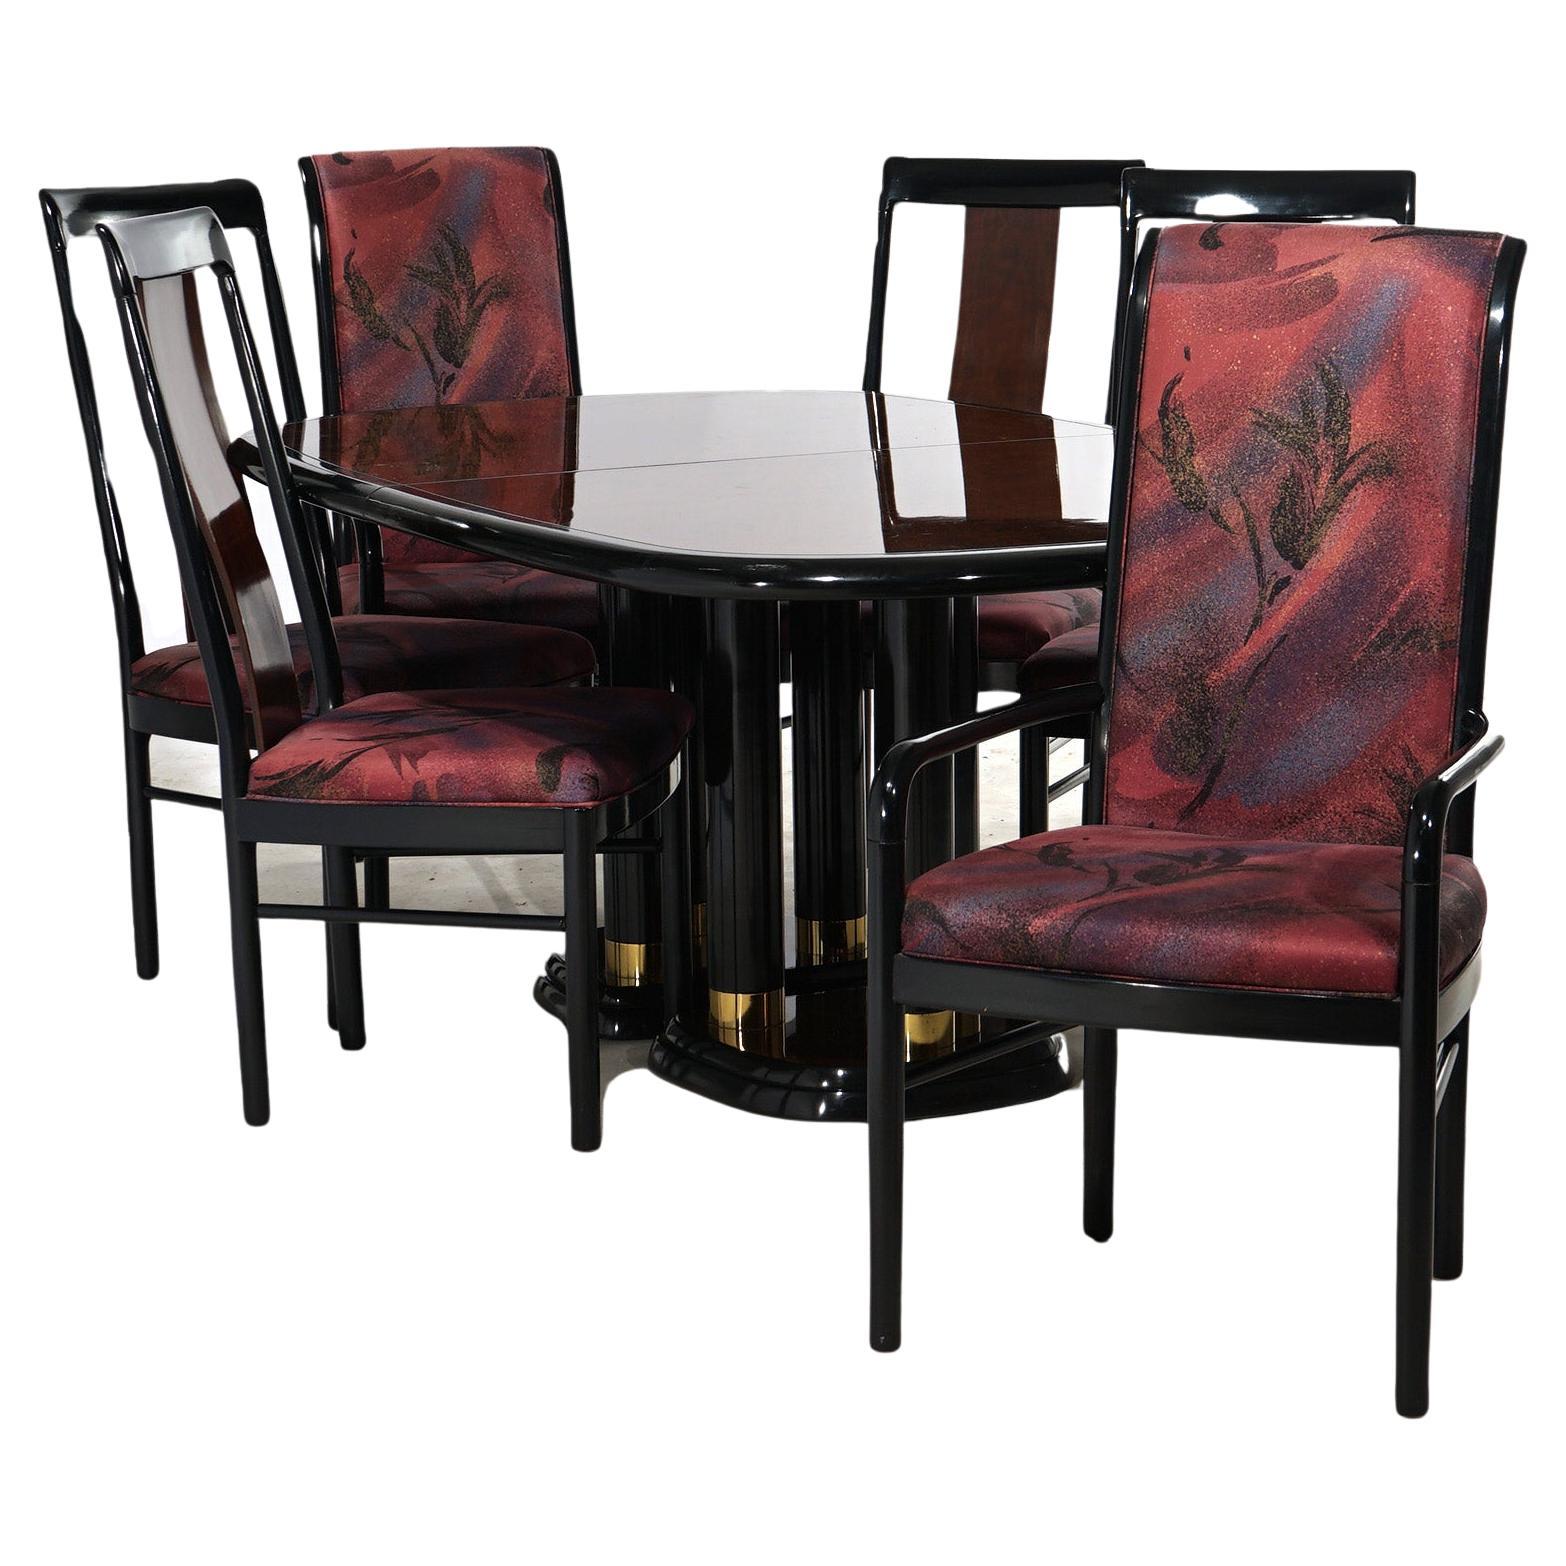 A Mid Century Modern dining set by Drexel of the Profiles line offers extension table with mahogany top, two leaves and ebonized cluster column base having brass bands; ebonized chairs with upholstery; maker label as photographed; 20th